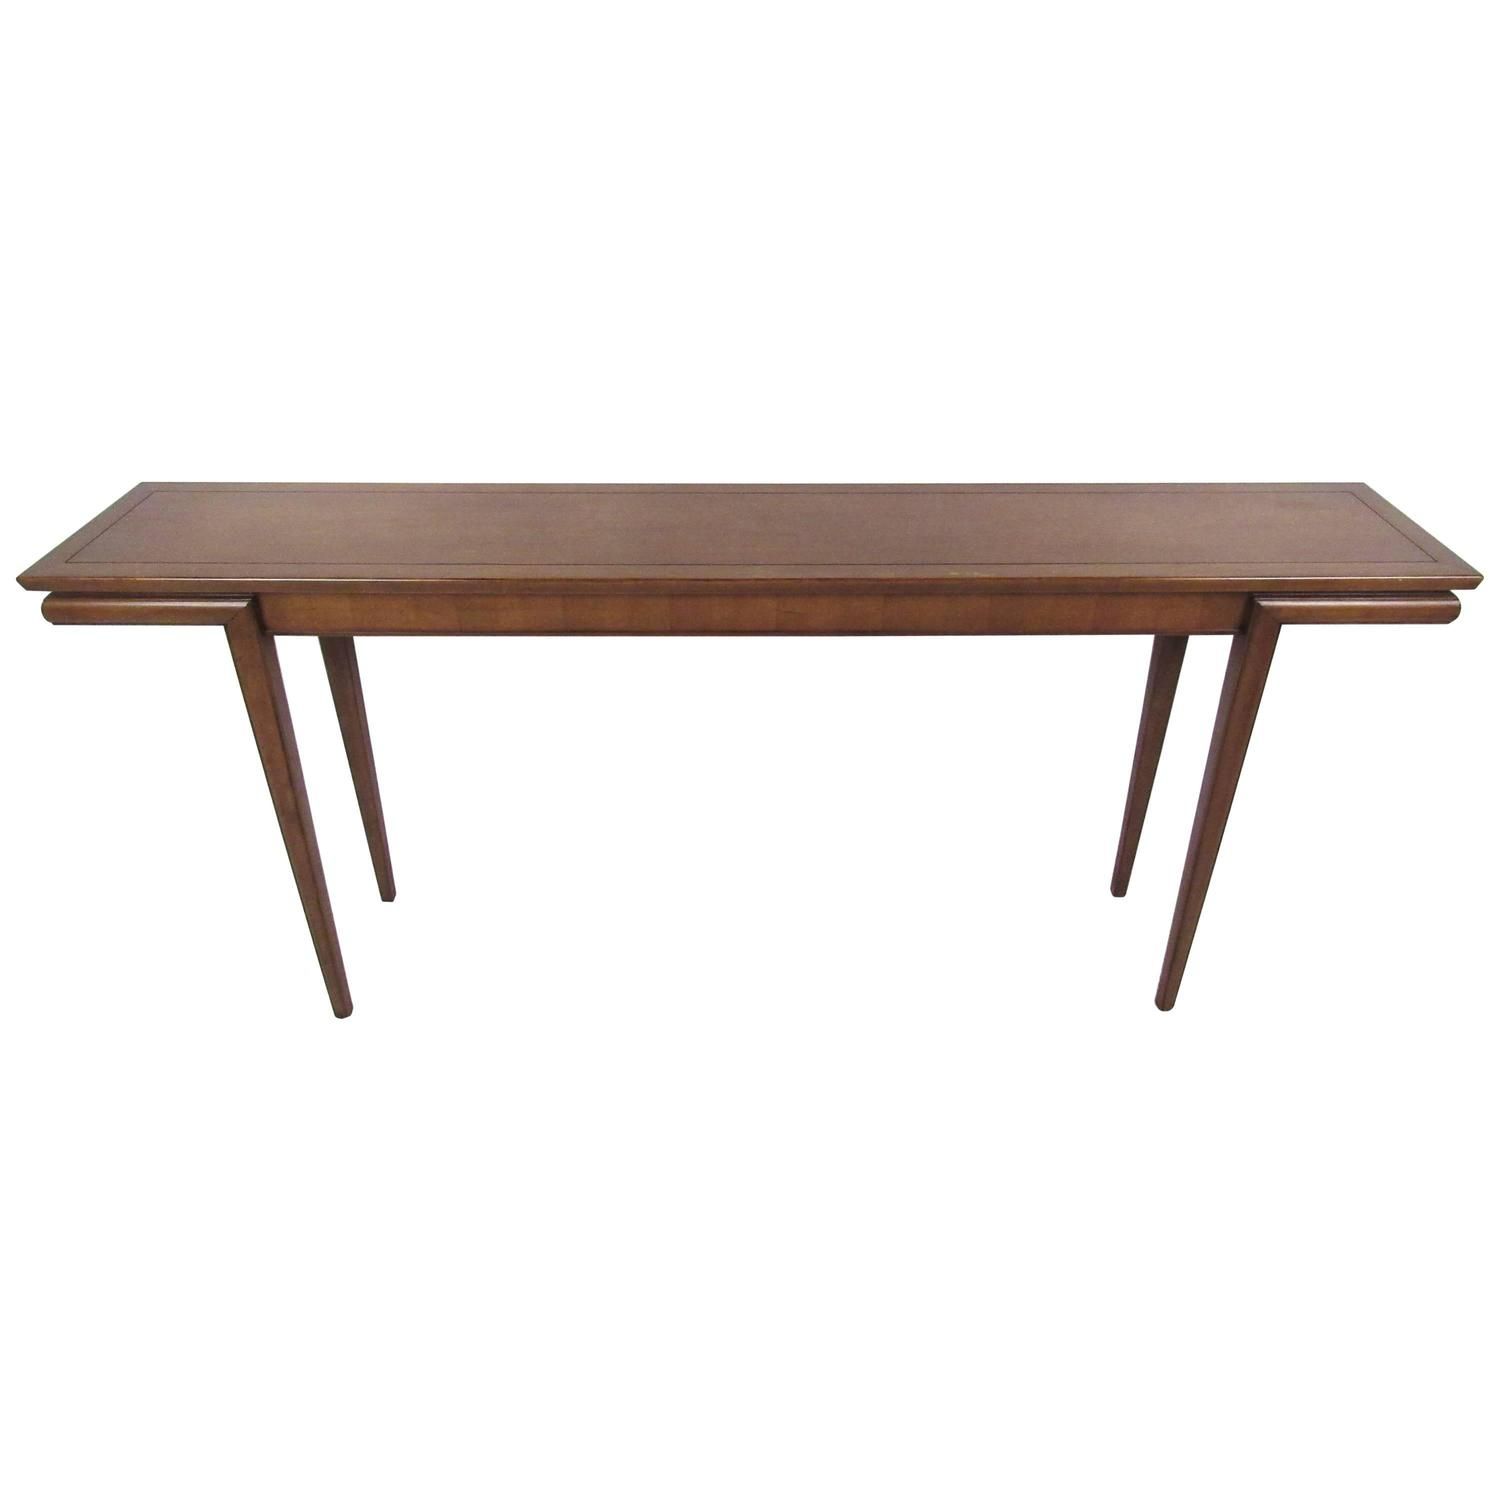 Mid Century Modern American Walnut Console Table At 1stdibs With Regard To 2 Piece Modern Nesting Console Tables (View 16 of 20)